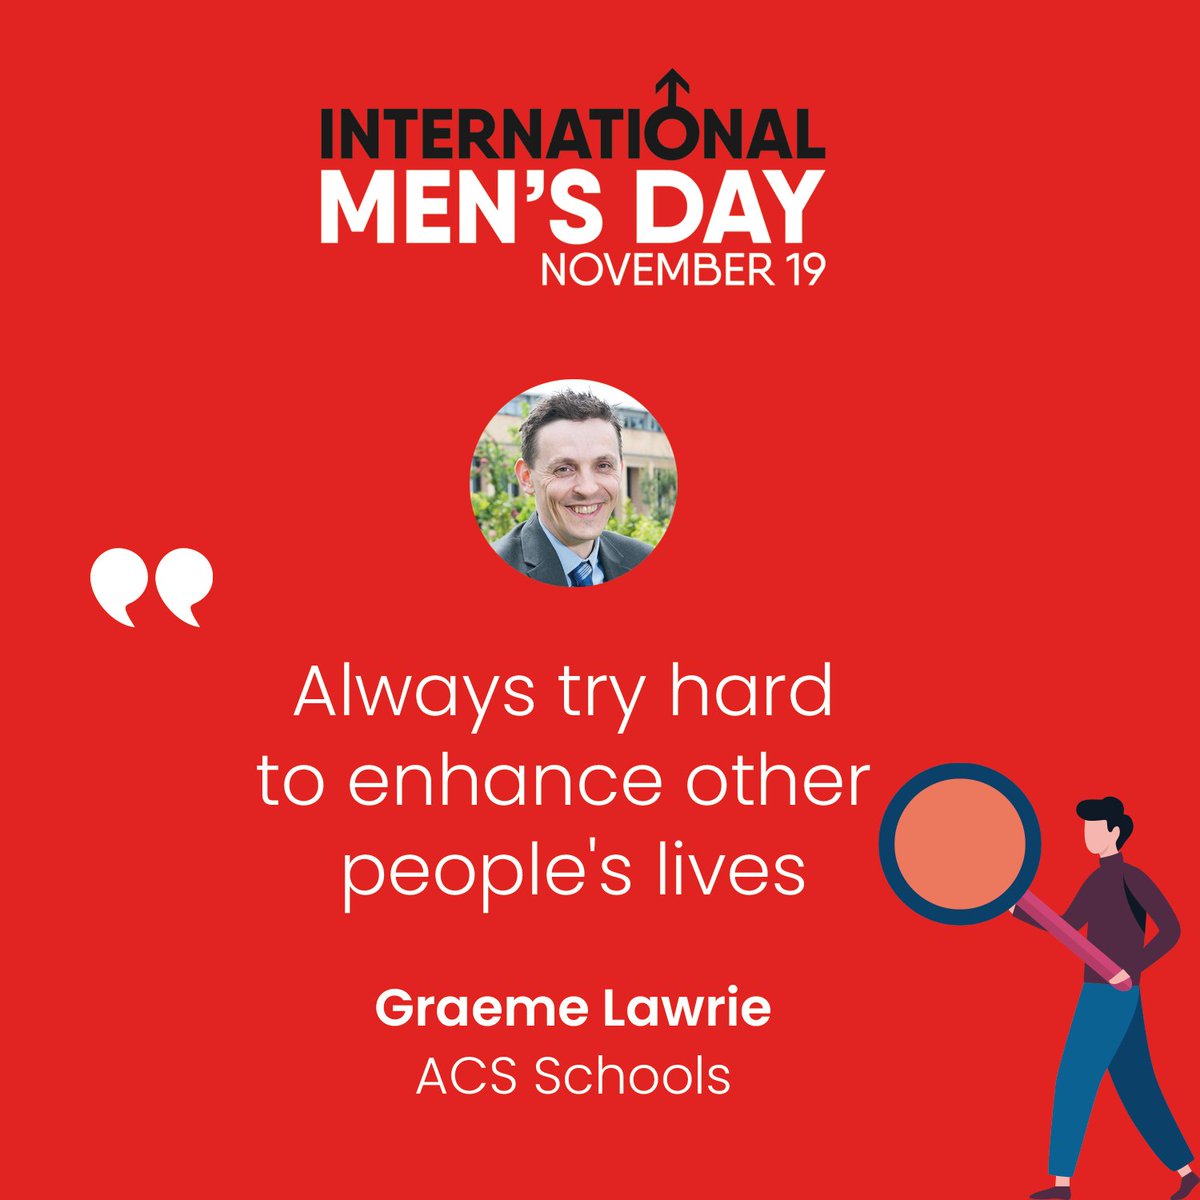 #InternationalMensDay, we asked international school community members to nominate a peer as one of their sources of inspiration. Paying it forward:@Graemelawrie84 says, 'Chris Yelf (@CLDFbrassband) inspires hundreds of students as a genuinely lovely man that puts others first'